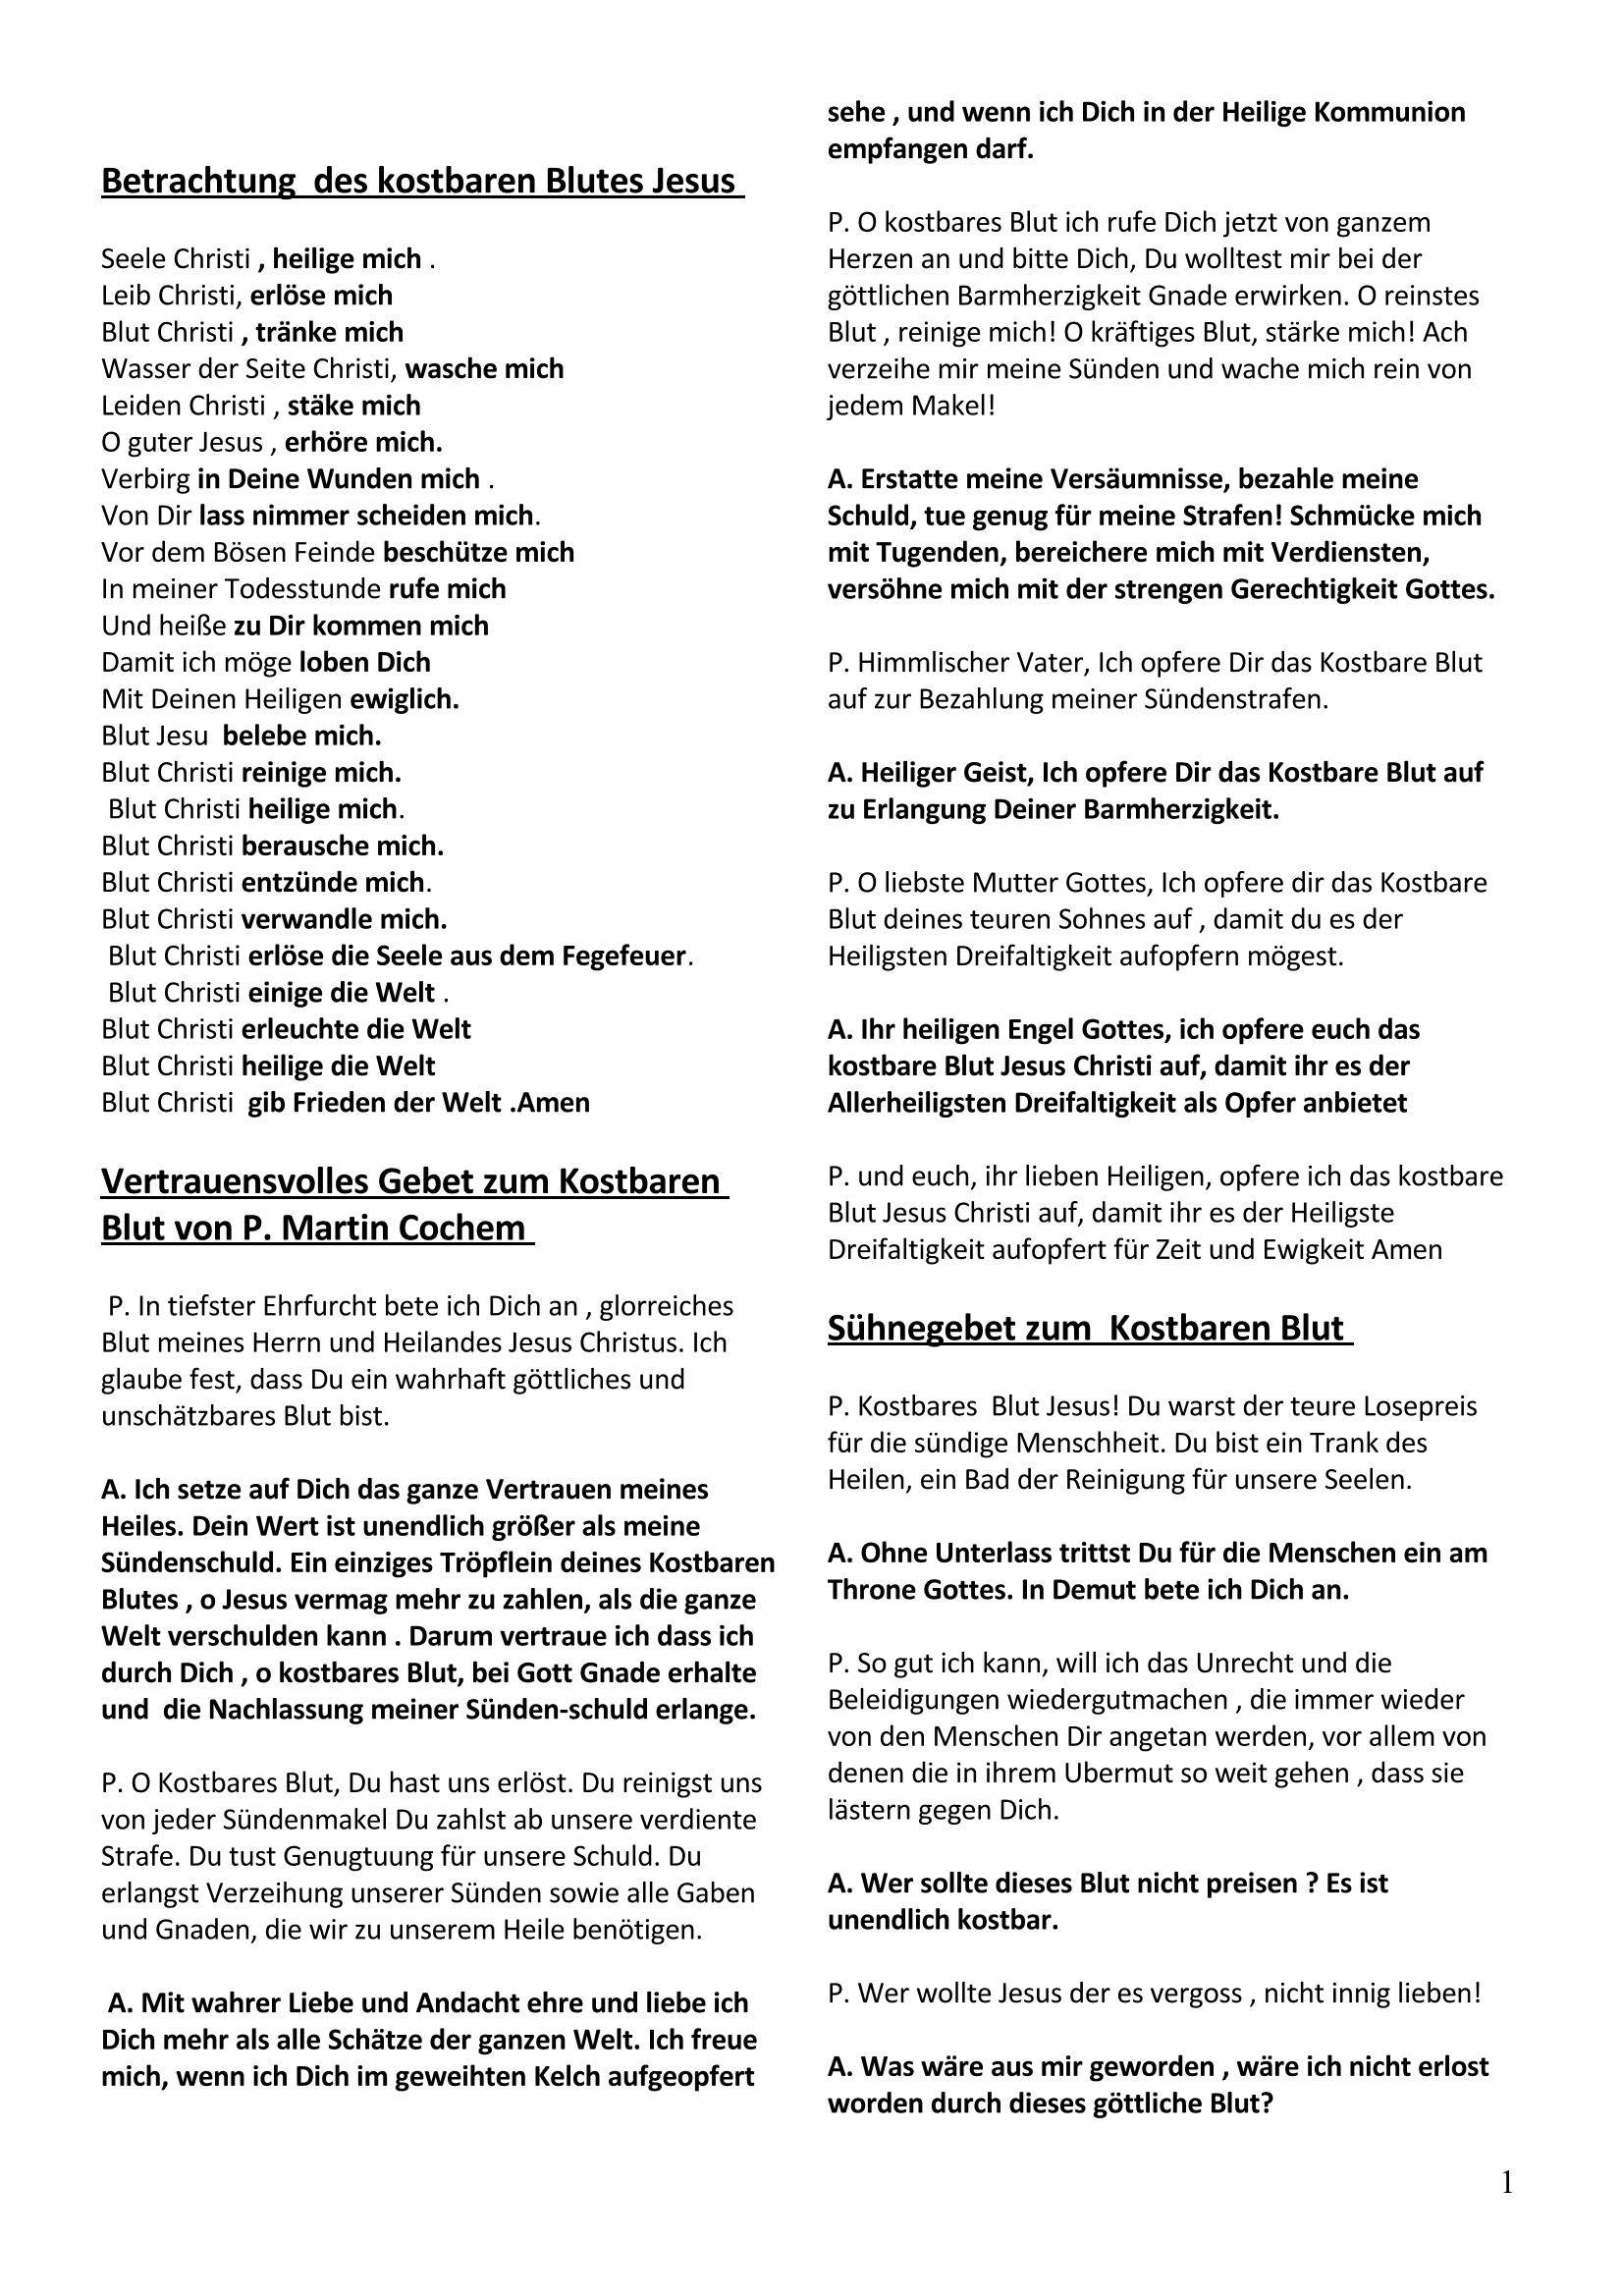 BetrachtungkostbarenBlutes Page 1